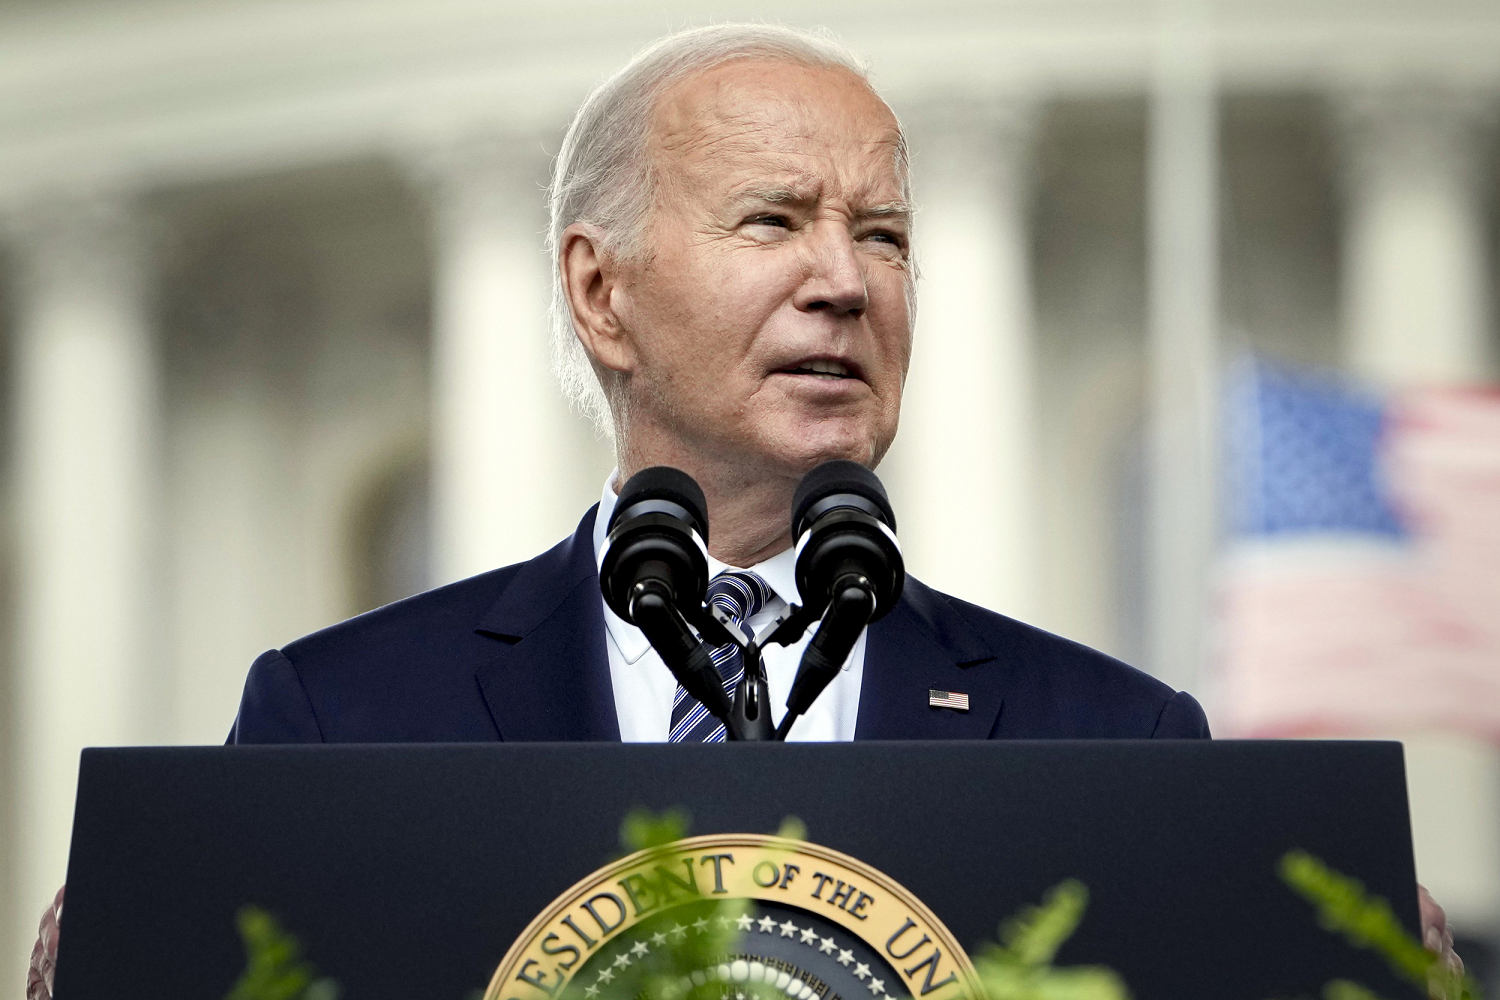 Biden to deliver Morehouse graduation speech amid concerns from faculty and students